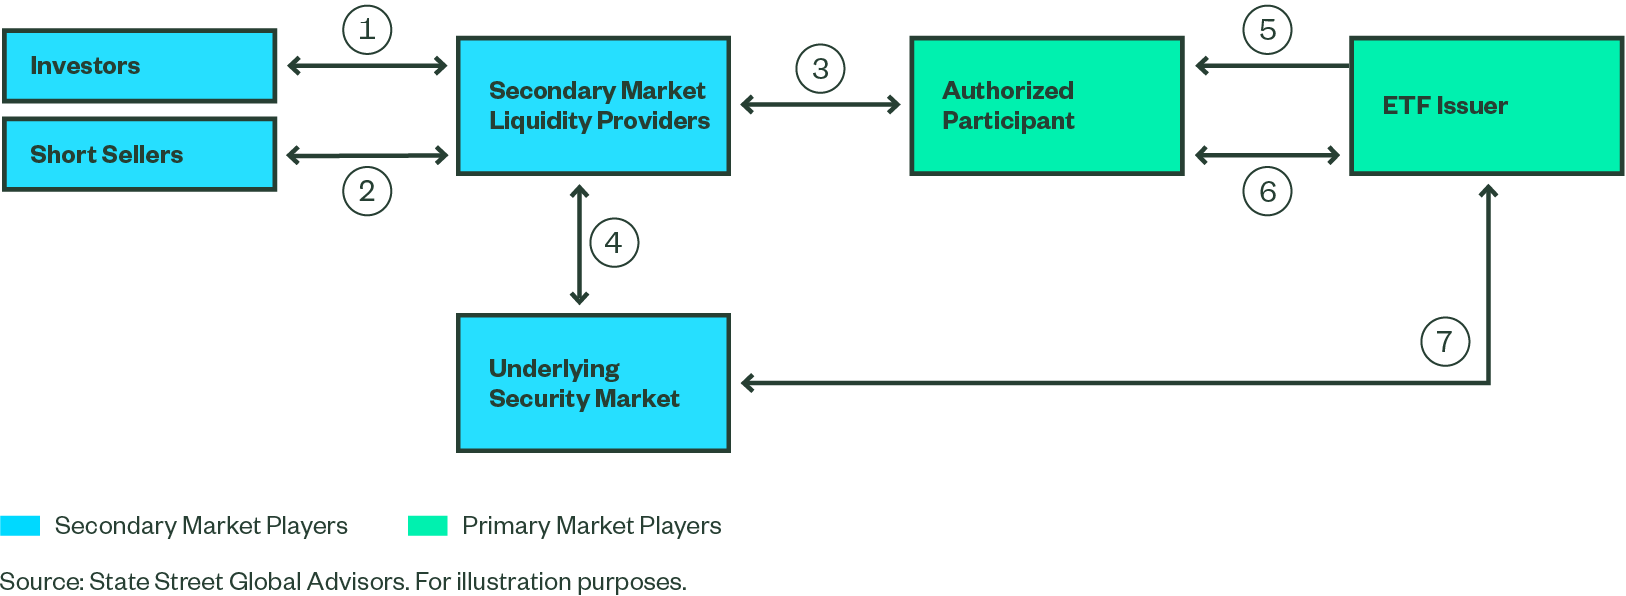 This figure is a flowchart showing the network of different players in the ETF ecosystem. It also depicts how players across the primary and secondary markets interact, enabling the liquidity of the instrument.